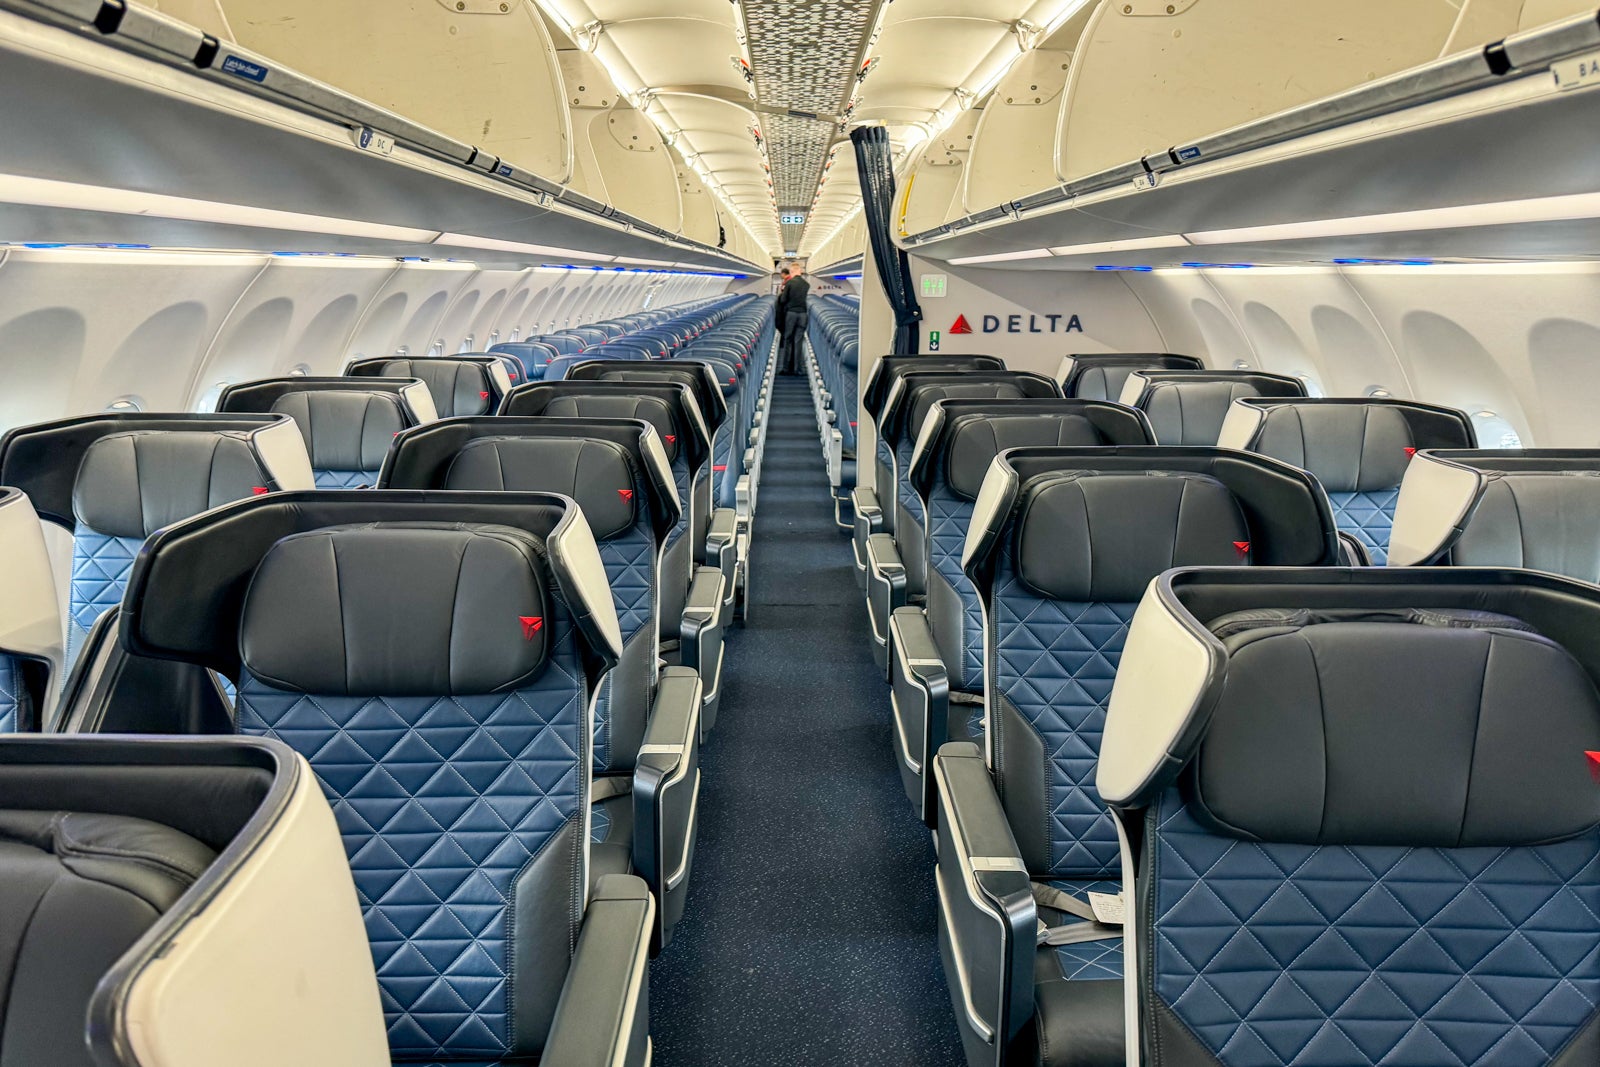 Transforming Airline Seats Adjust Width for Each Passenger